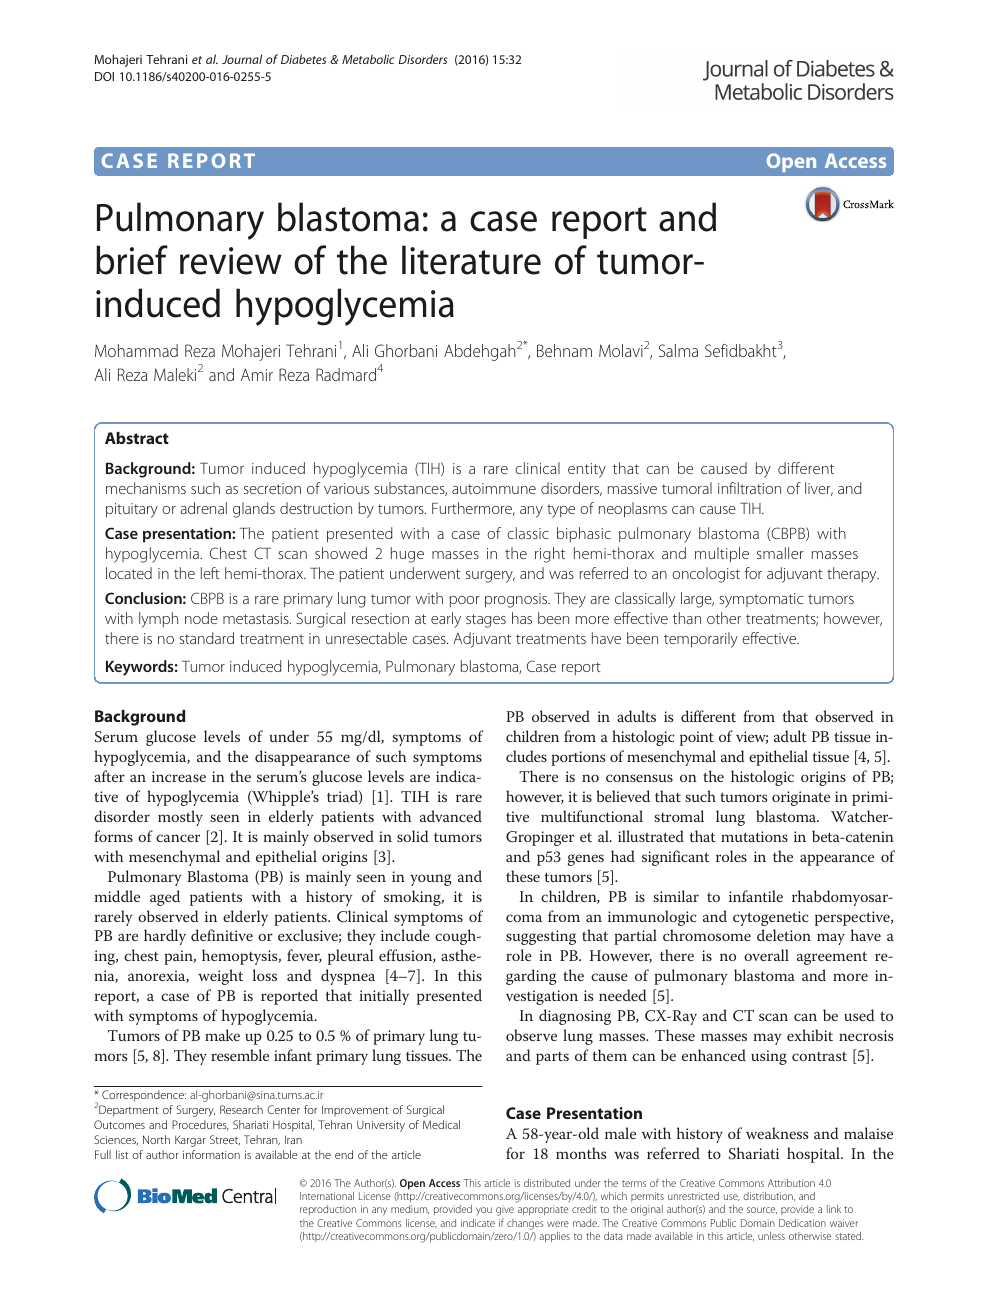 Pulmonary blastoma: a case report and brief review of the literature of  tumor-induced hypoglycemia – topic of research paper in Clinical medicine.  Download scholarly article PDF and read for free on CyberLeninka